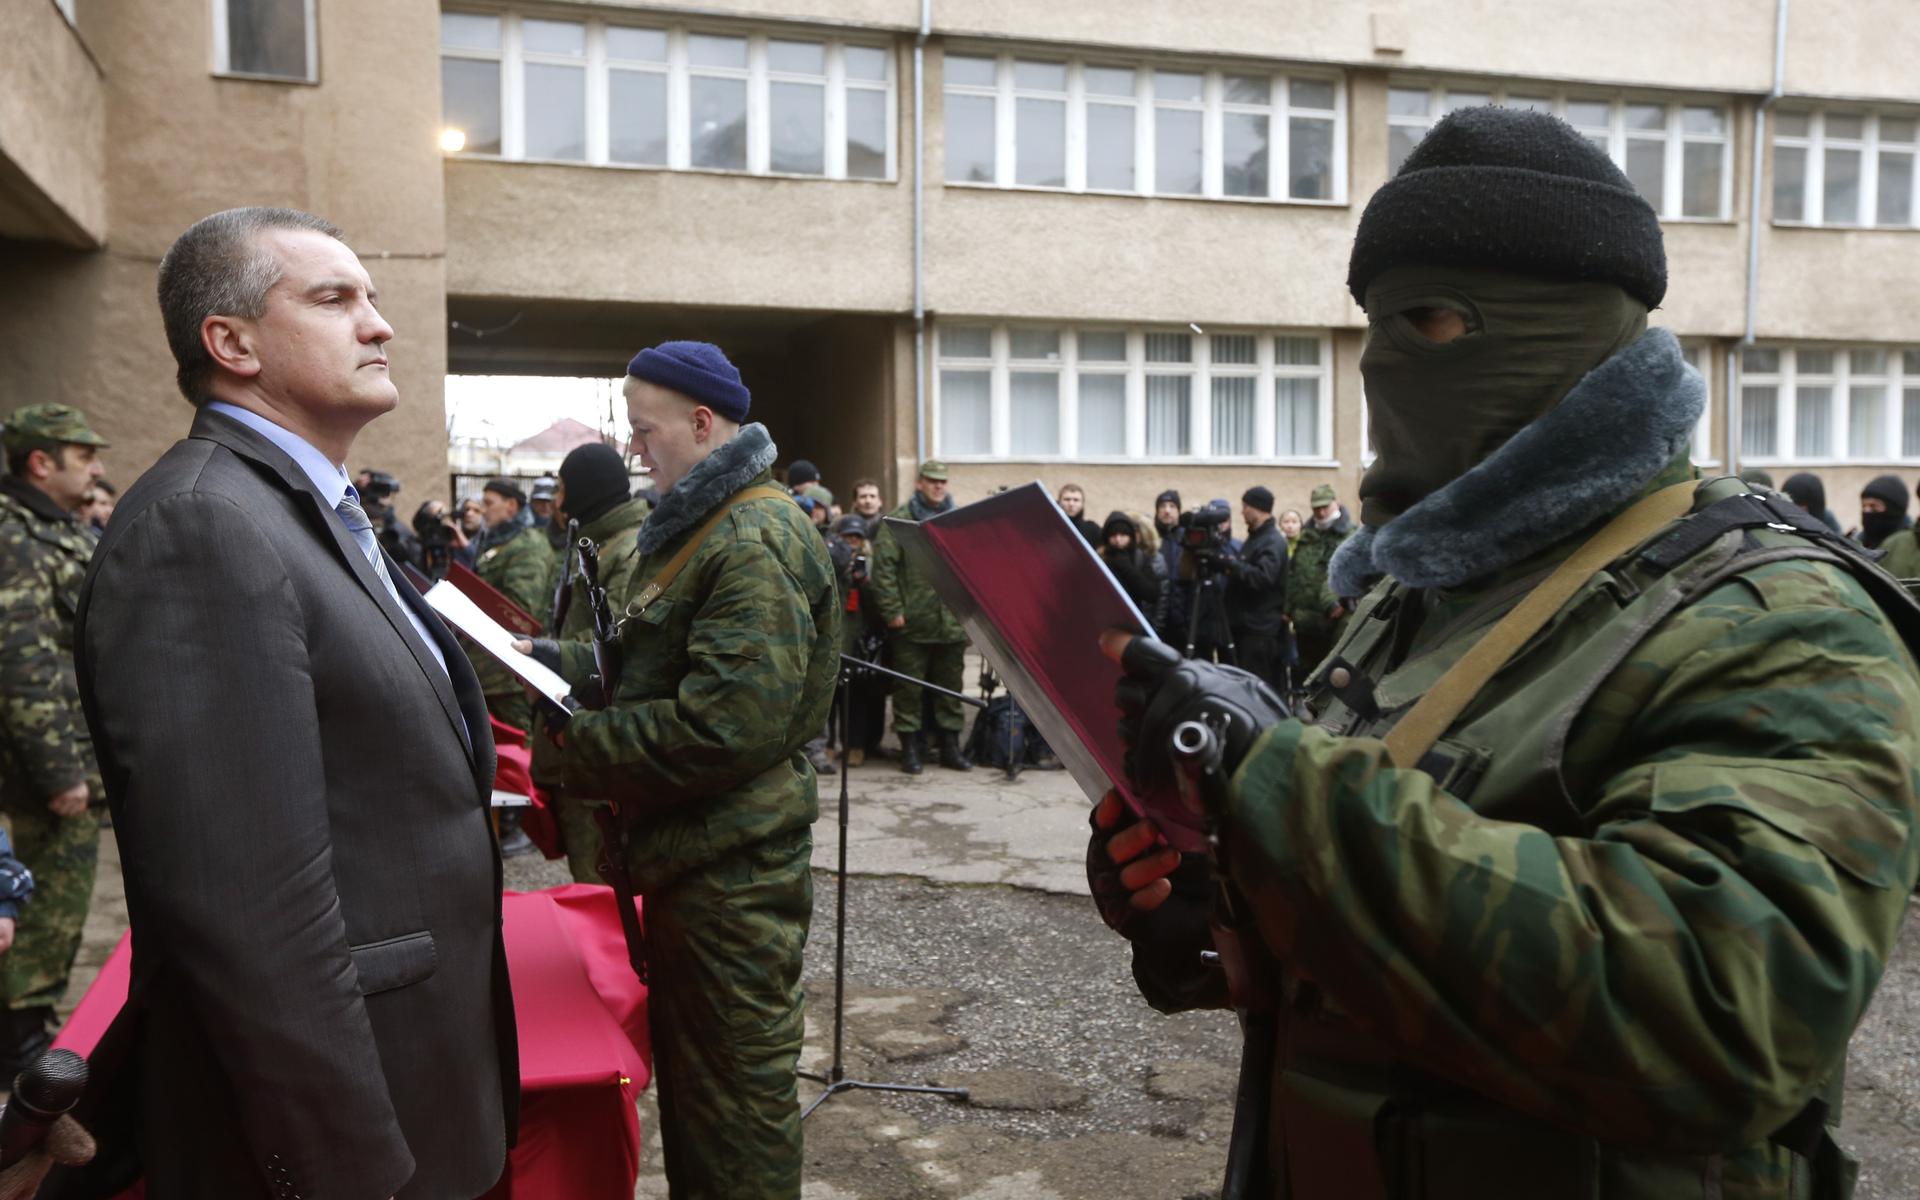 Sergei Aksyonov, Crimea's pro-Russian prime minister, stands as a member of a pro-Russian self defense unit takes an oath to Crimea government in Simferopol on March 10, 2014. Russian forces consolidated their hold on Ukraine's Crimea peninsula on Monday,